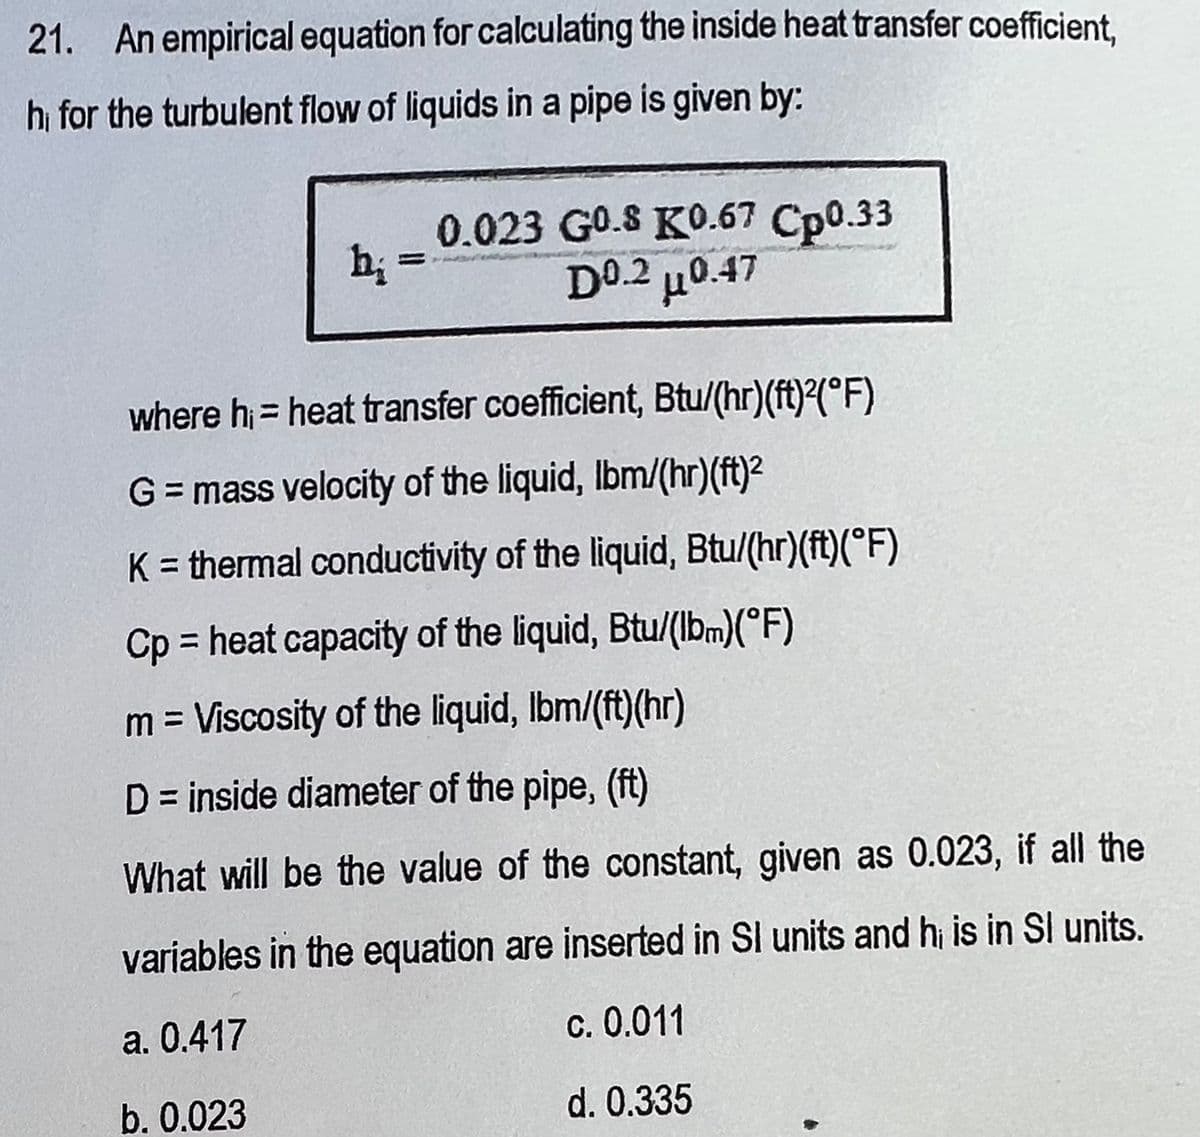 21. An empirical equation for calculating the inside heat transfer coefficient,
hi for the turbulent flow of liquids in a pipe is given by:
h₂ =
0.023 GO.S KO.67 Cp0.33
D0.2 μ0.47
where h₁ = heat transfer coefficient, Btu/(hr)(ft)2(°F)
G = mass velocity of the liquid, lbm/(hr)(ft)²
K = thermal conductivity of the liquid, Btu/(hr)(ft)(°F)
Cp = heat capacity of the liquid, Btu/(lbm)(°F)
m = Viscosity of the liquid, lbm/(ft)(hr)
D = inside diameter of the pipe, (ft)
What will be the value of the constant, given as 0.023, if all the
variables in the equation are inserted in Sl units and hi is in Sl units.
a. 0.417
c. 0.011
b. 0.023
d. 0.335